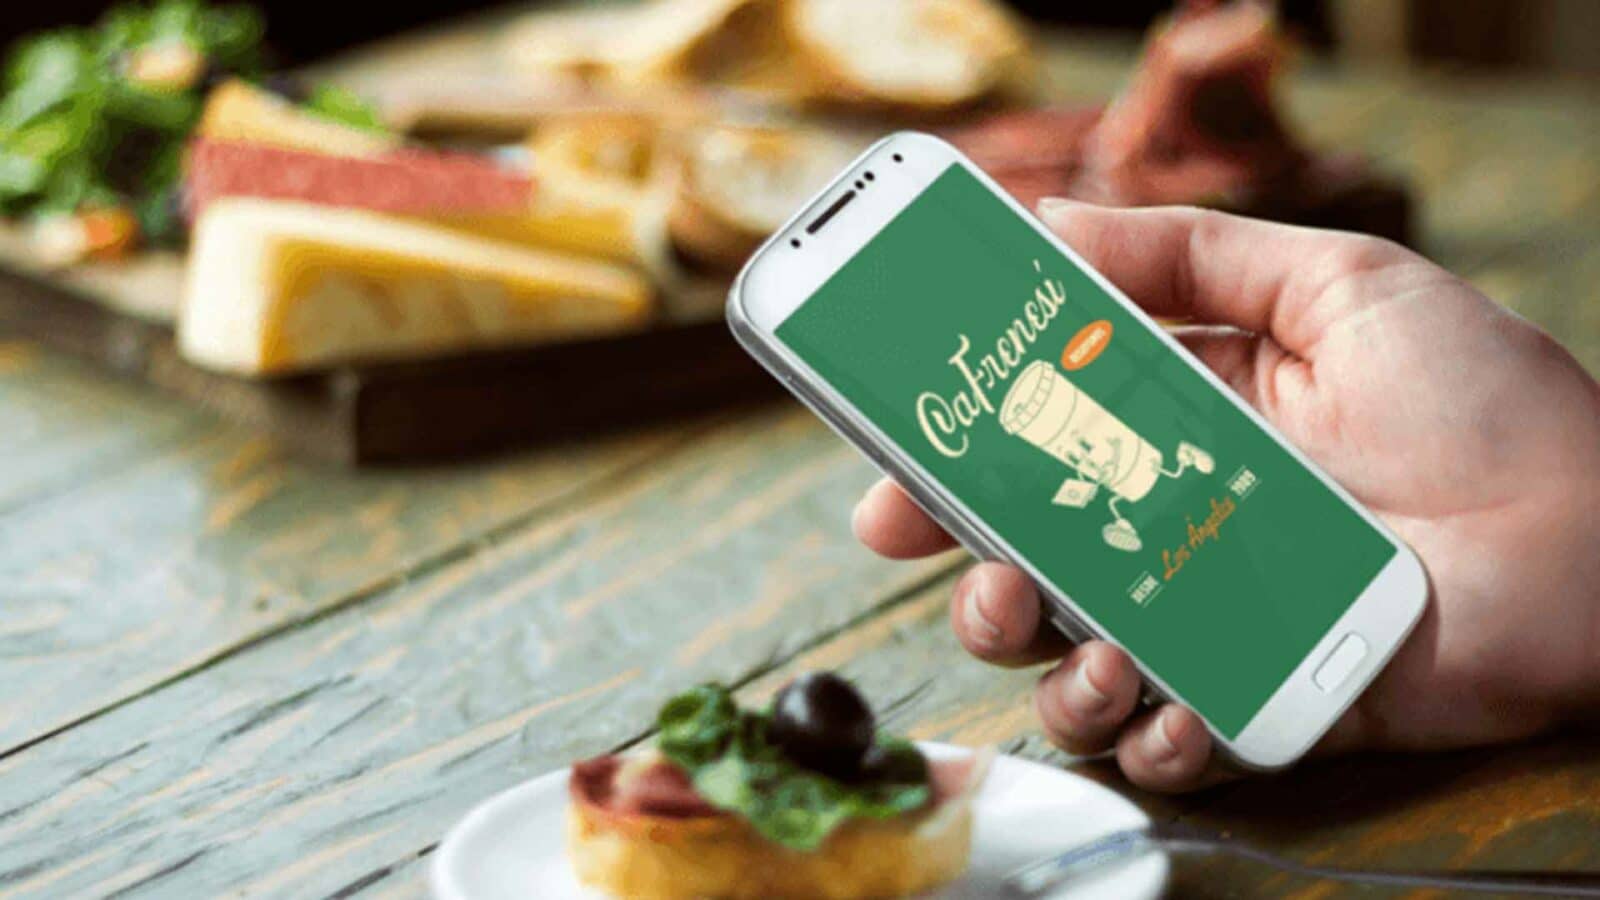 Logo of a company on a phone screen with a sandwich in the background